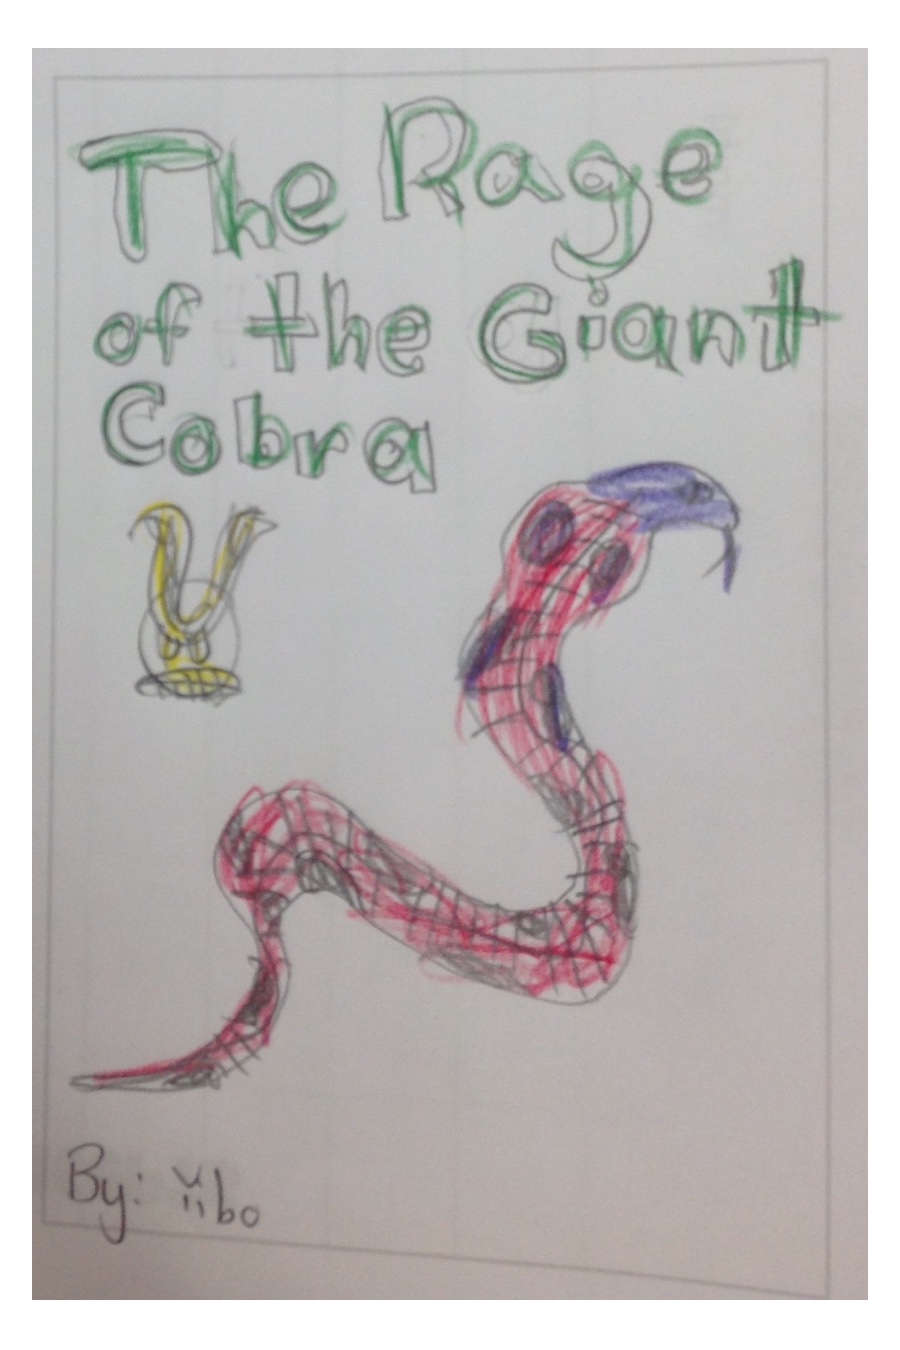 The Rage of the Giant Cobra by Yibo Z